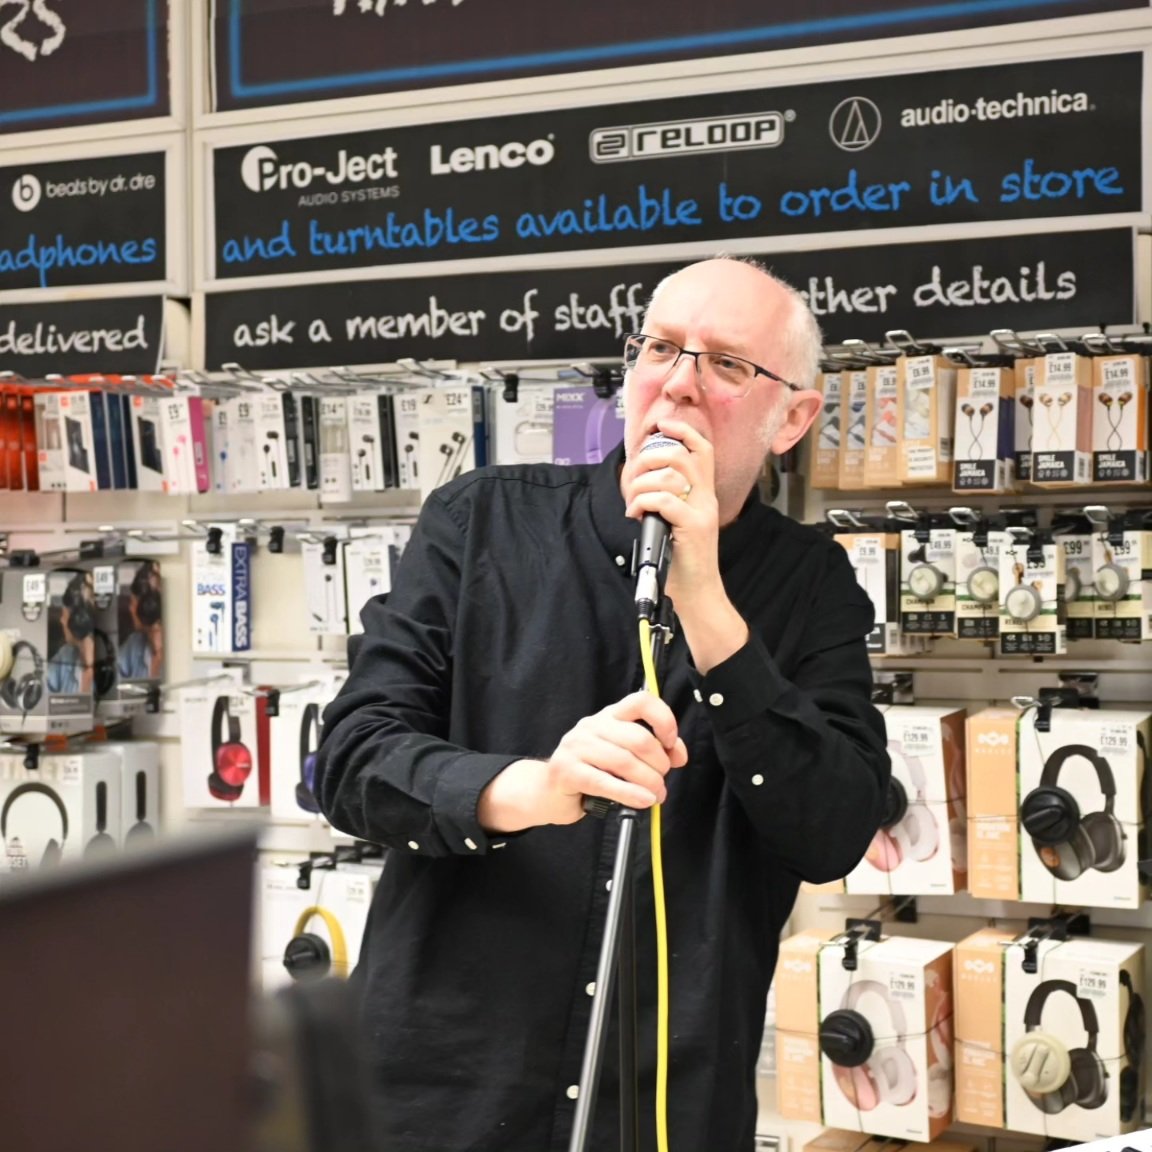 It's exactly 12 months since I played live in store at @hmvBury !! It was the 1st time I'd played live in public apart from a couple of open mic nights. It was a great day & I even sold a few of my CDs on the day! Read more about it here... mistrustmusic.co.uk/mistrust-live-…